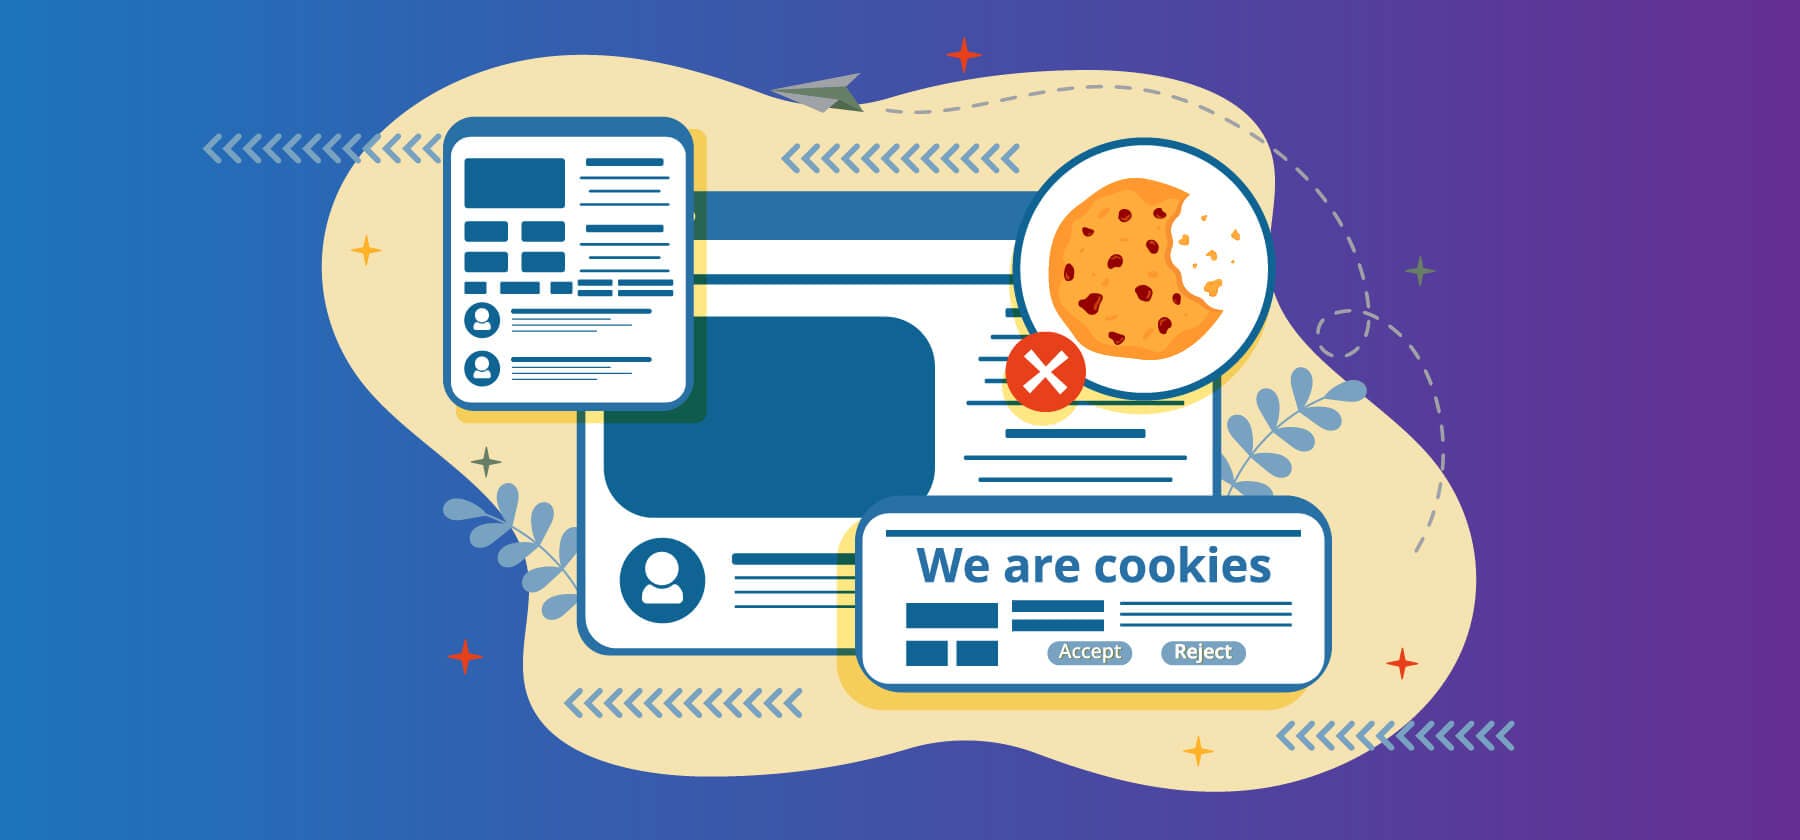 Ultimate Guide to Cookieless Advertising You Need to Have